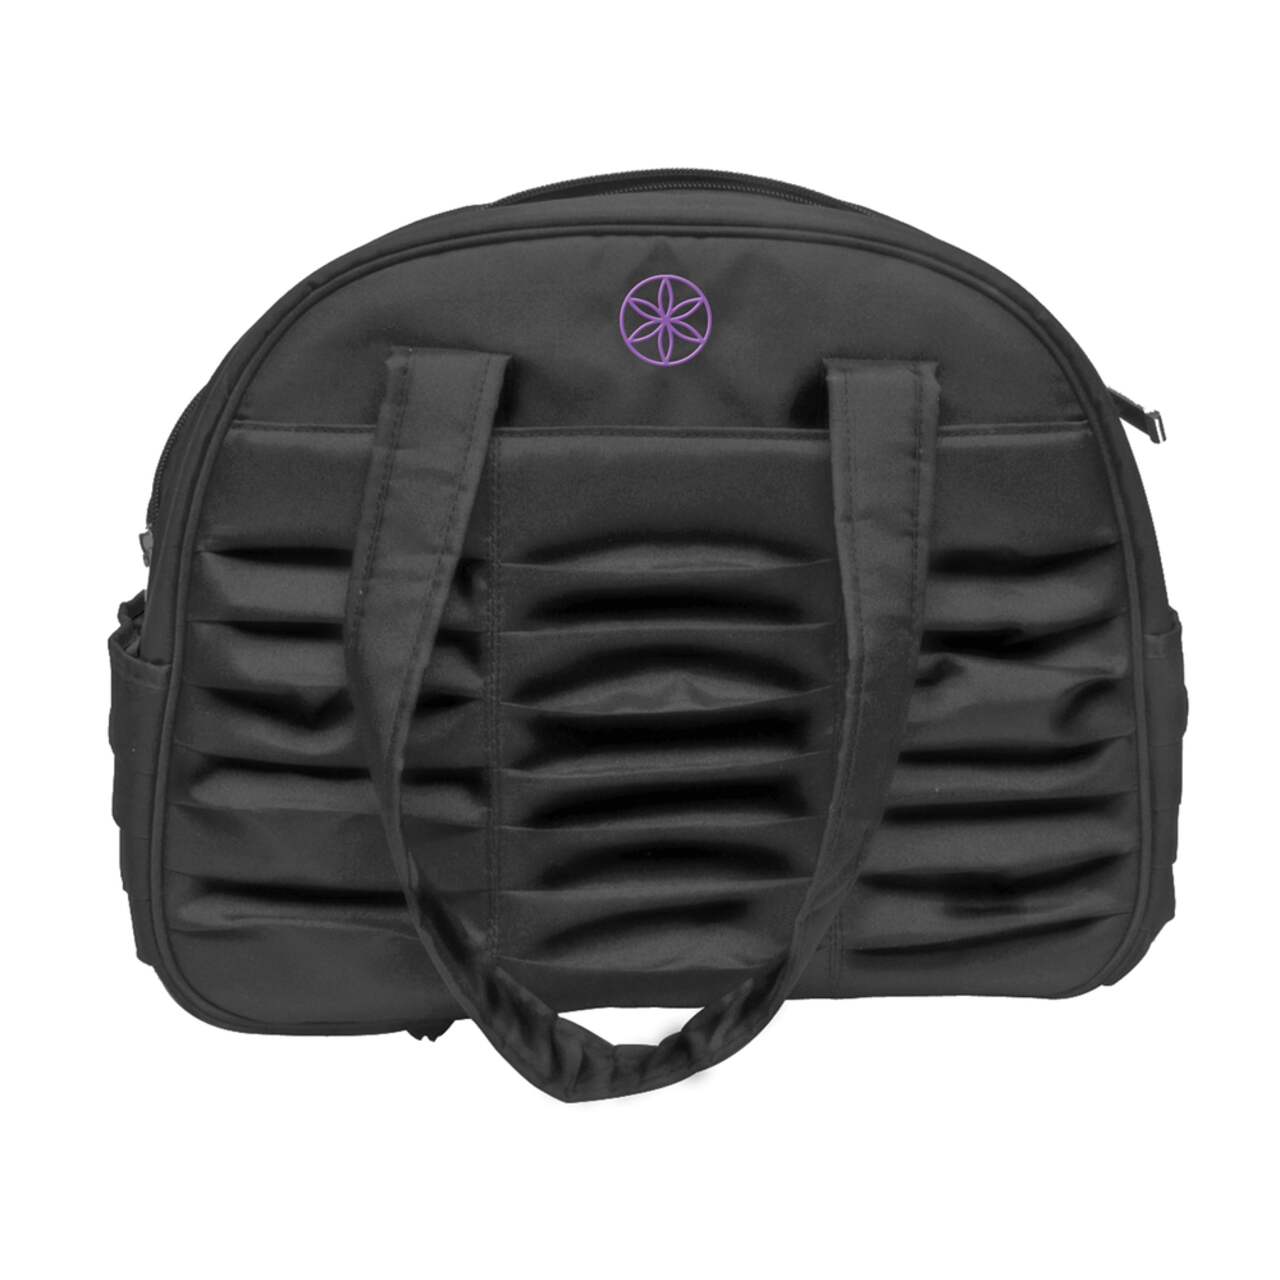 https://media-www.canadiantire.ca/product/playing/exercise/exercise-accessories/0840907/gaiam-metro-yoga-bag-e0c1d931-9291-438d-bb48-8838844cf3a3.png?imdensity=1&imwidth=640&impolicy=mZoom